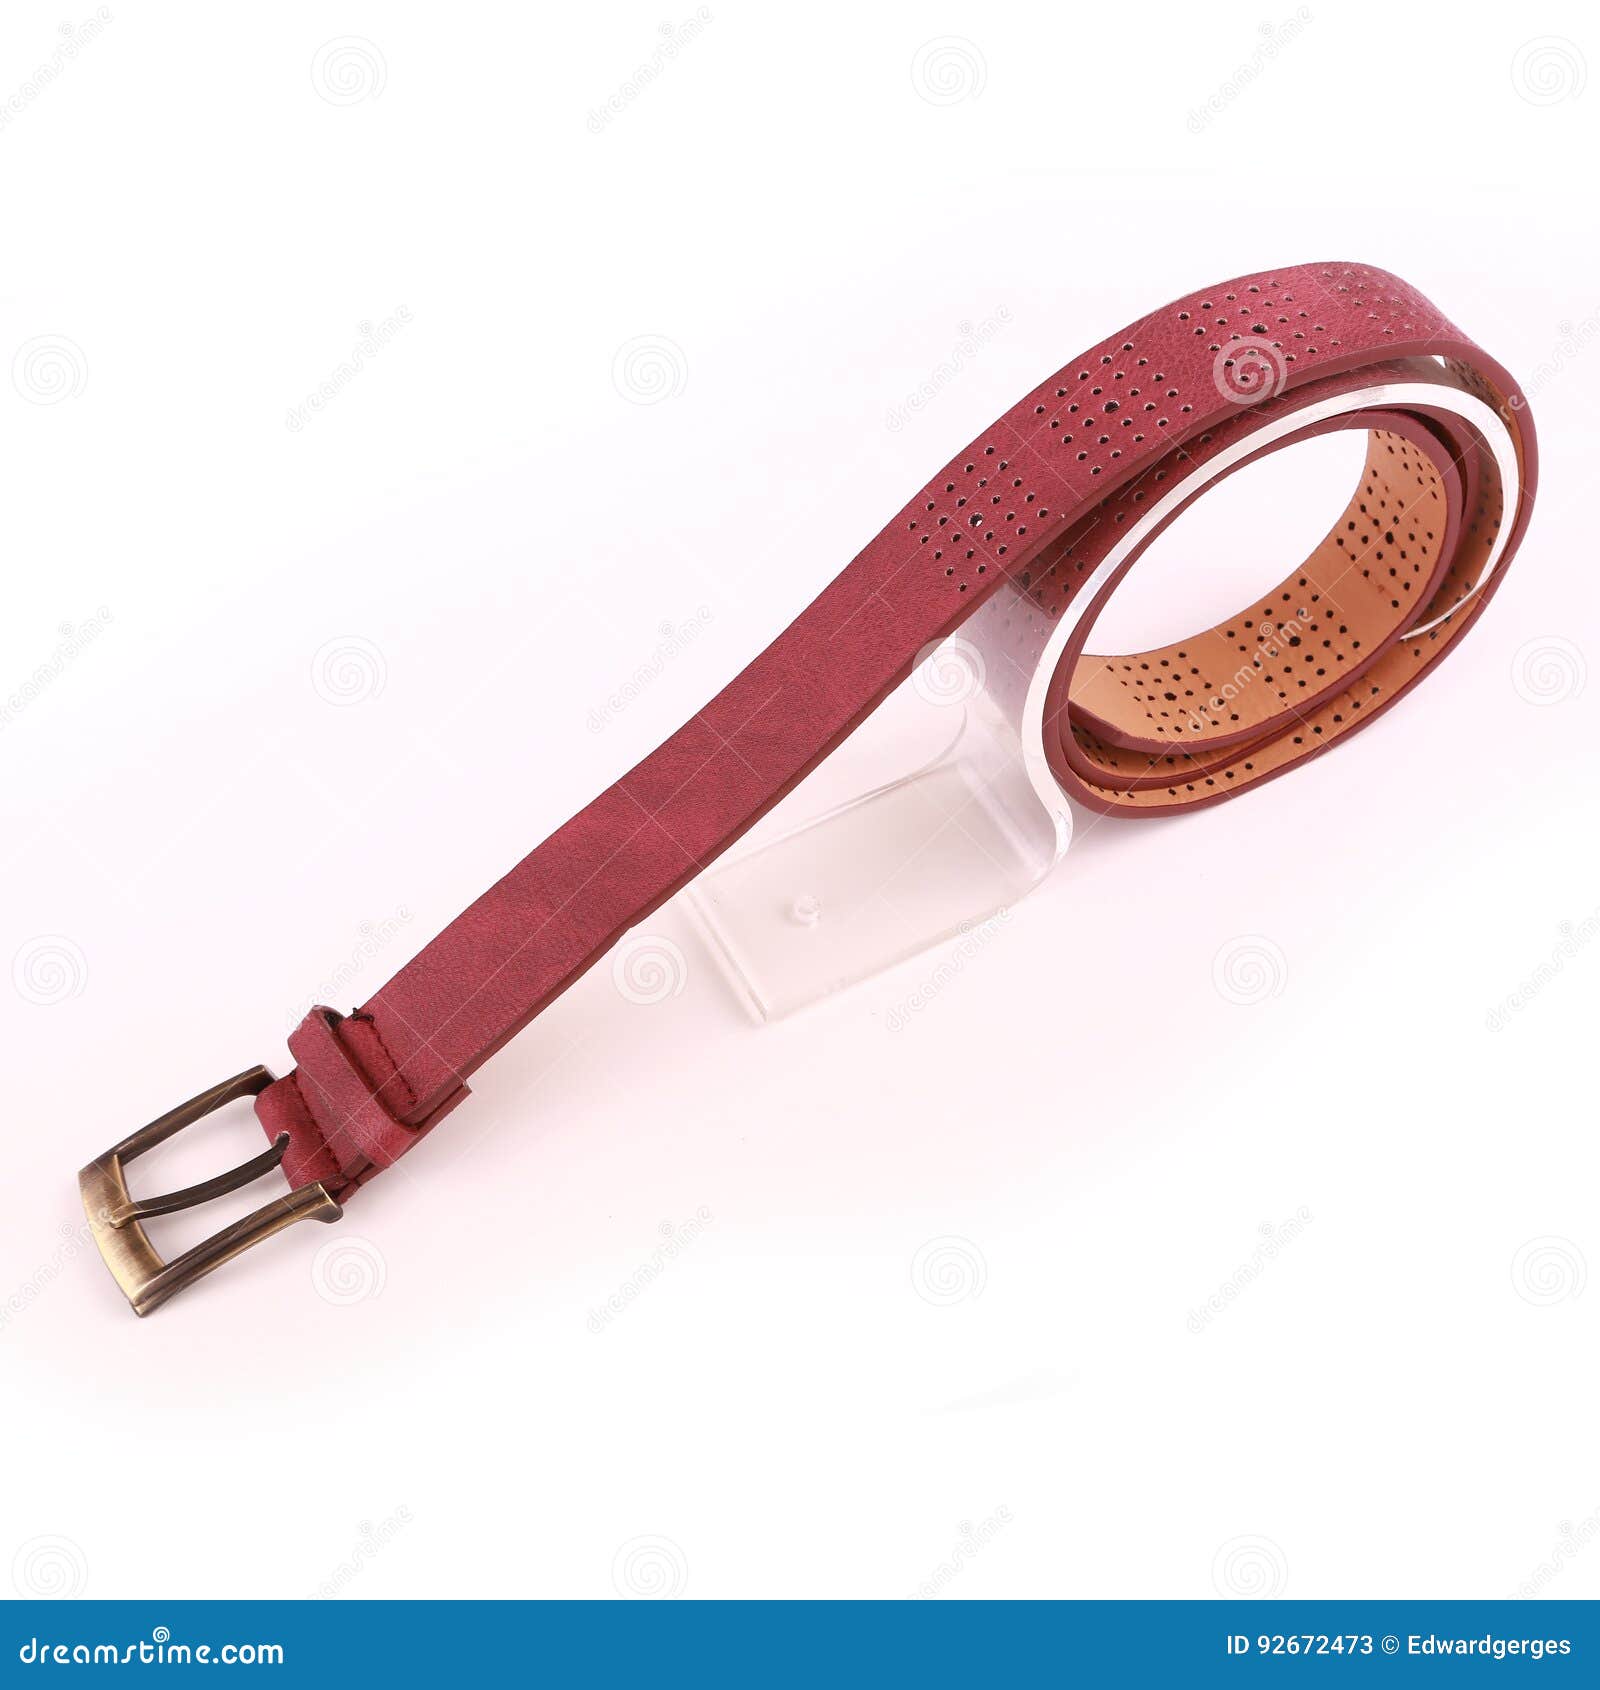 Leather belt stock image. Image of gray, entertainment - 92672473